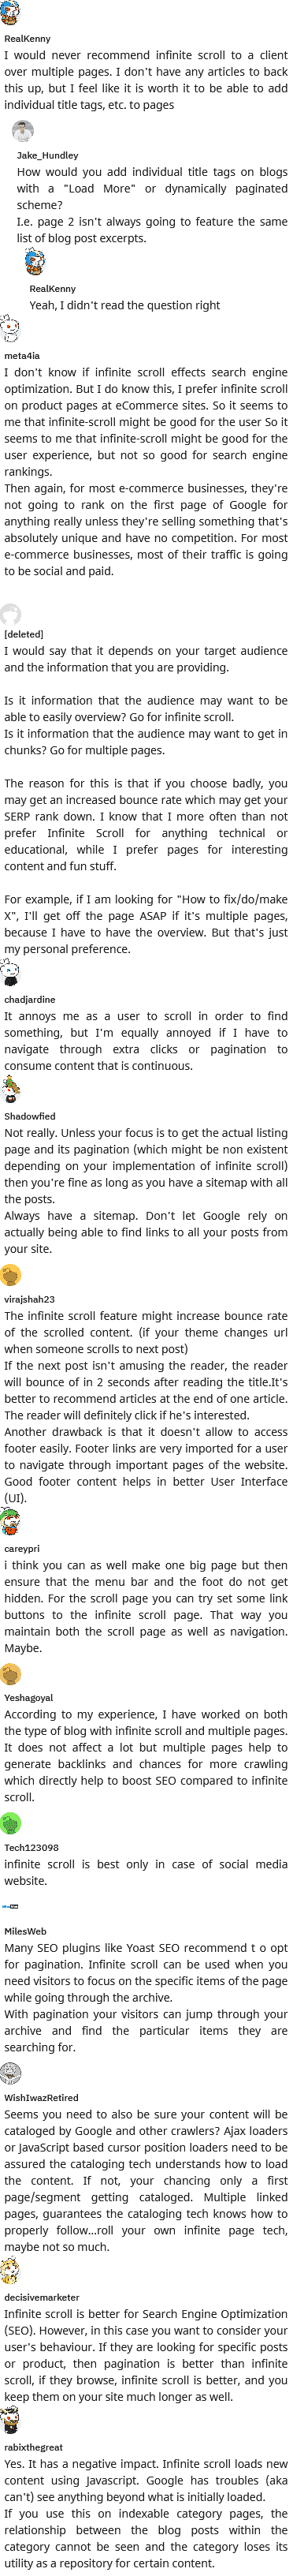 people own pov about using infinite scroll rather than pagination on ux and seo